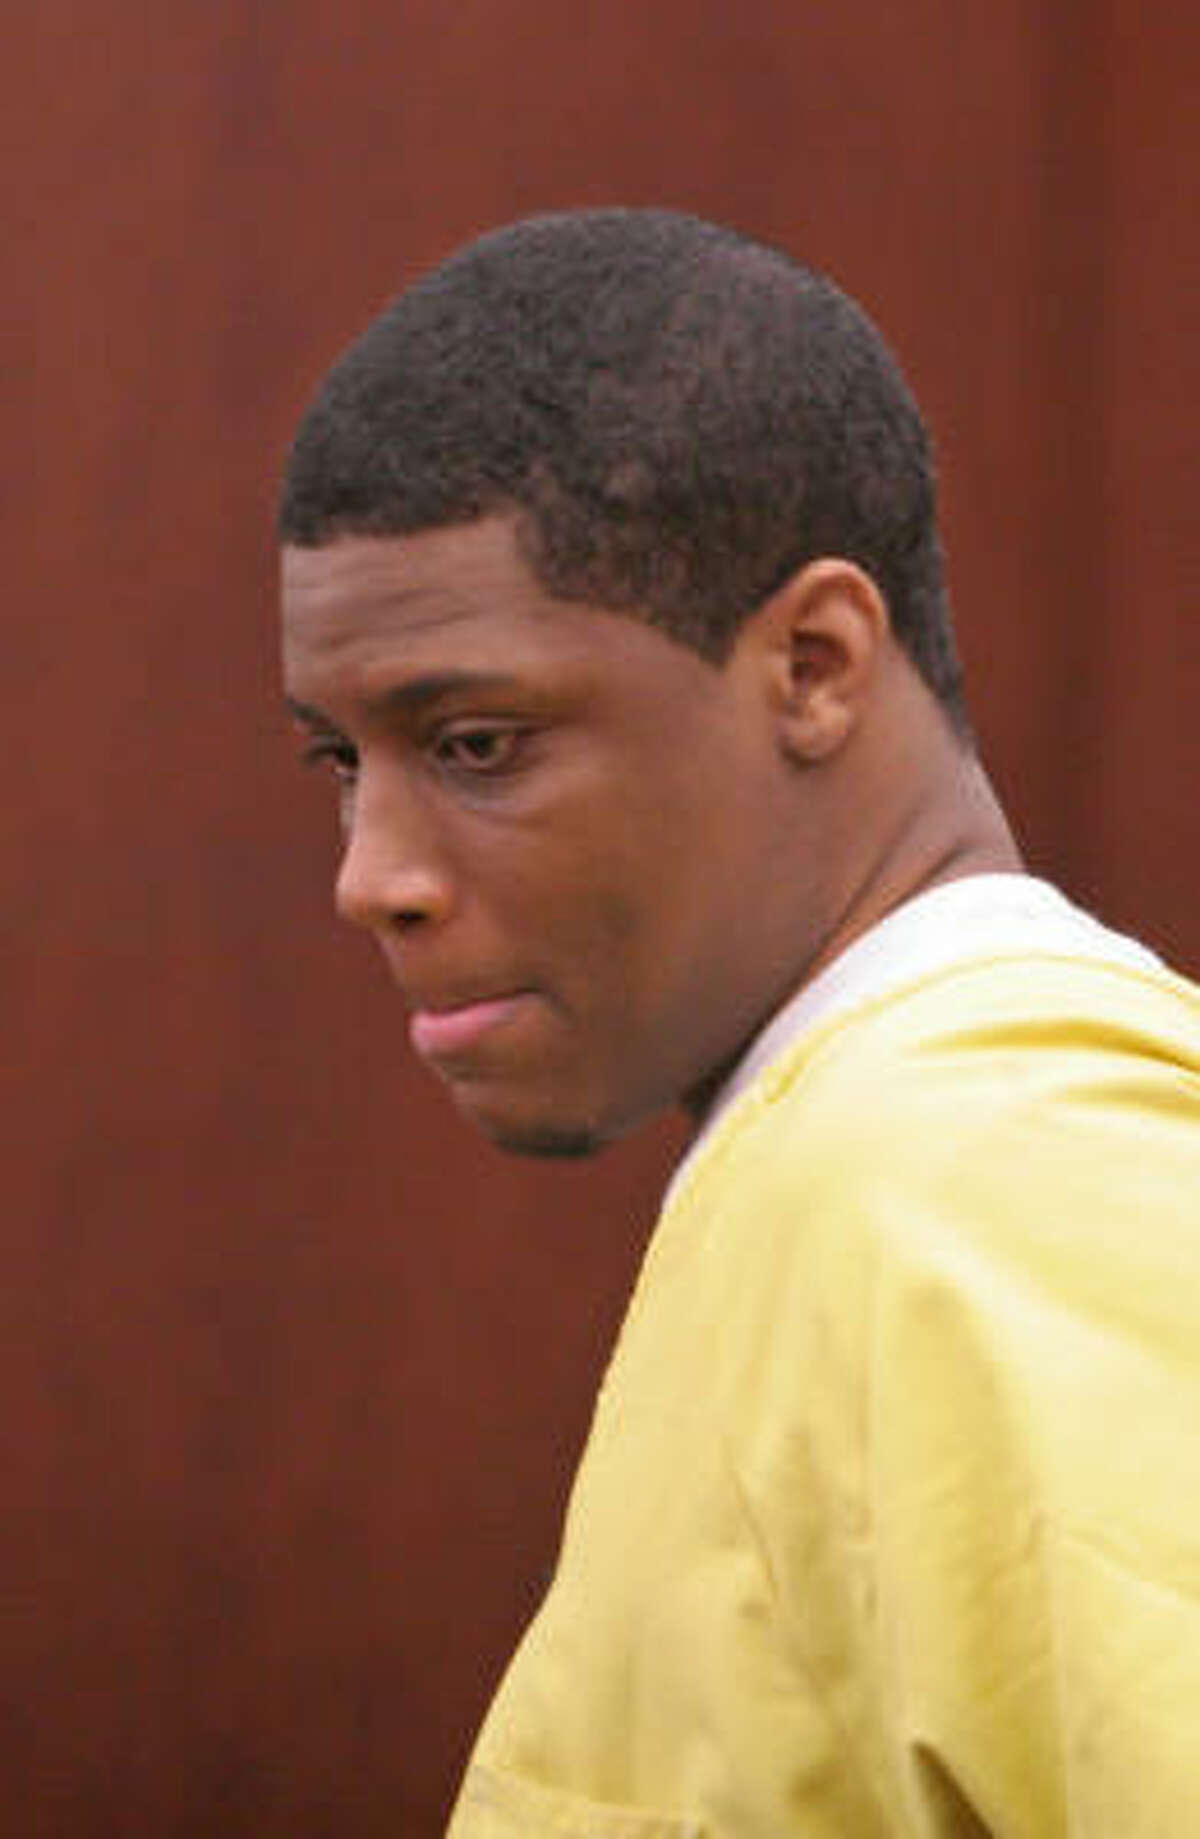 Brandon Zachary is sentenced to life in prison today for the shooting death of Houston police Officer Reuben De Leon.